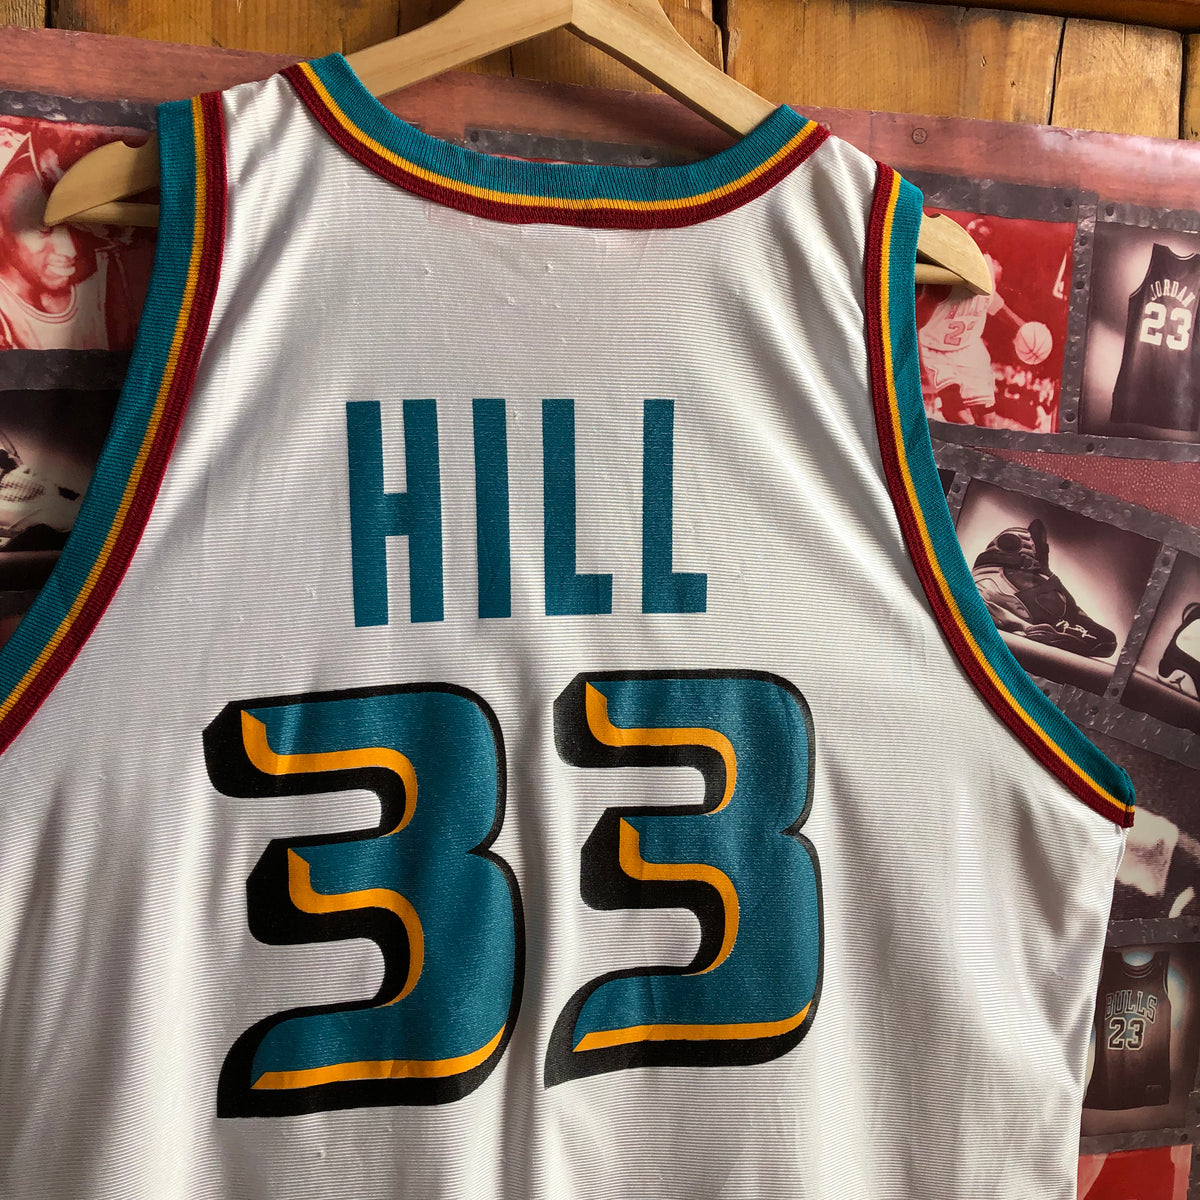 Vintage Grant Hill Detroit Pistons Champion Jersey 90s NBA basketball – For  All To Envy